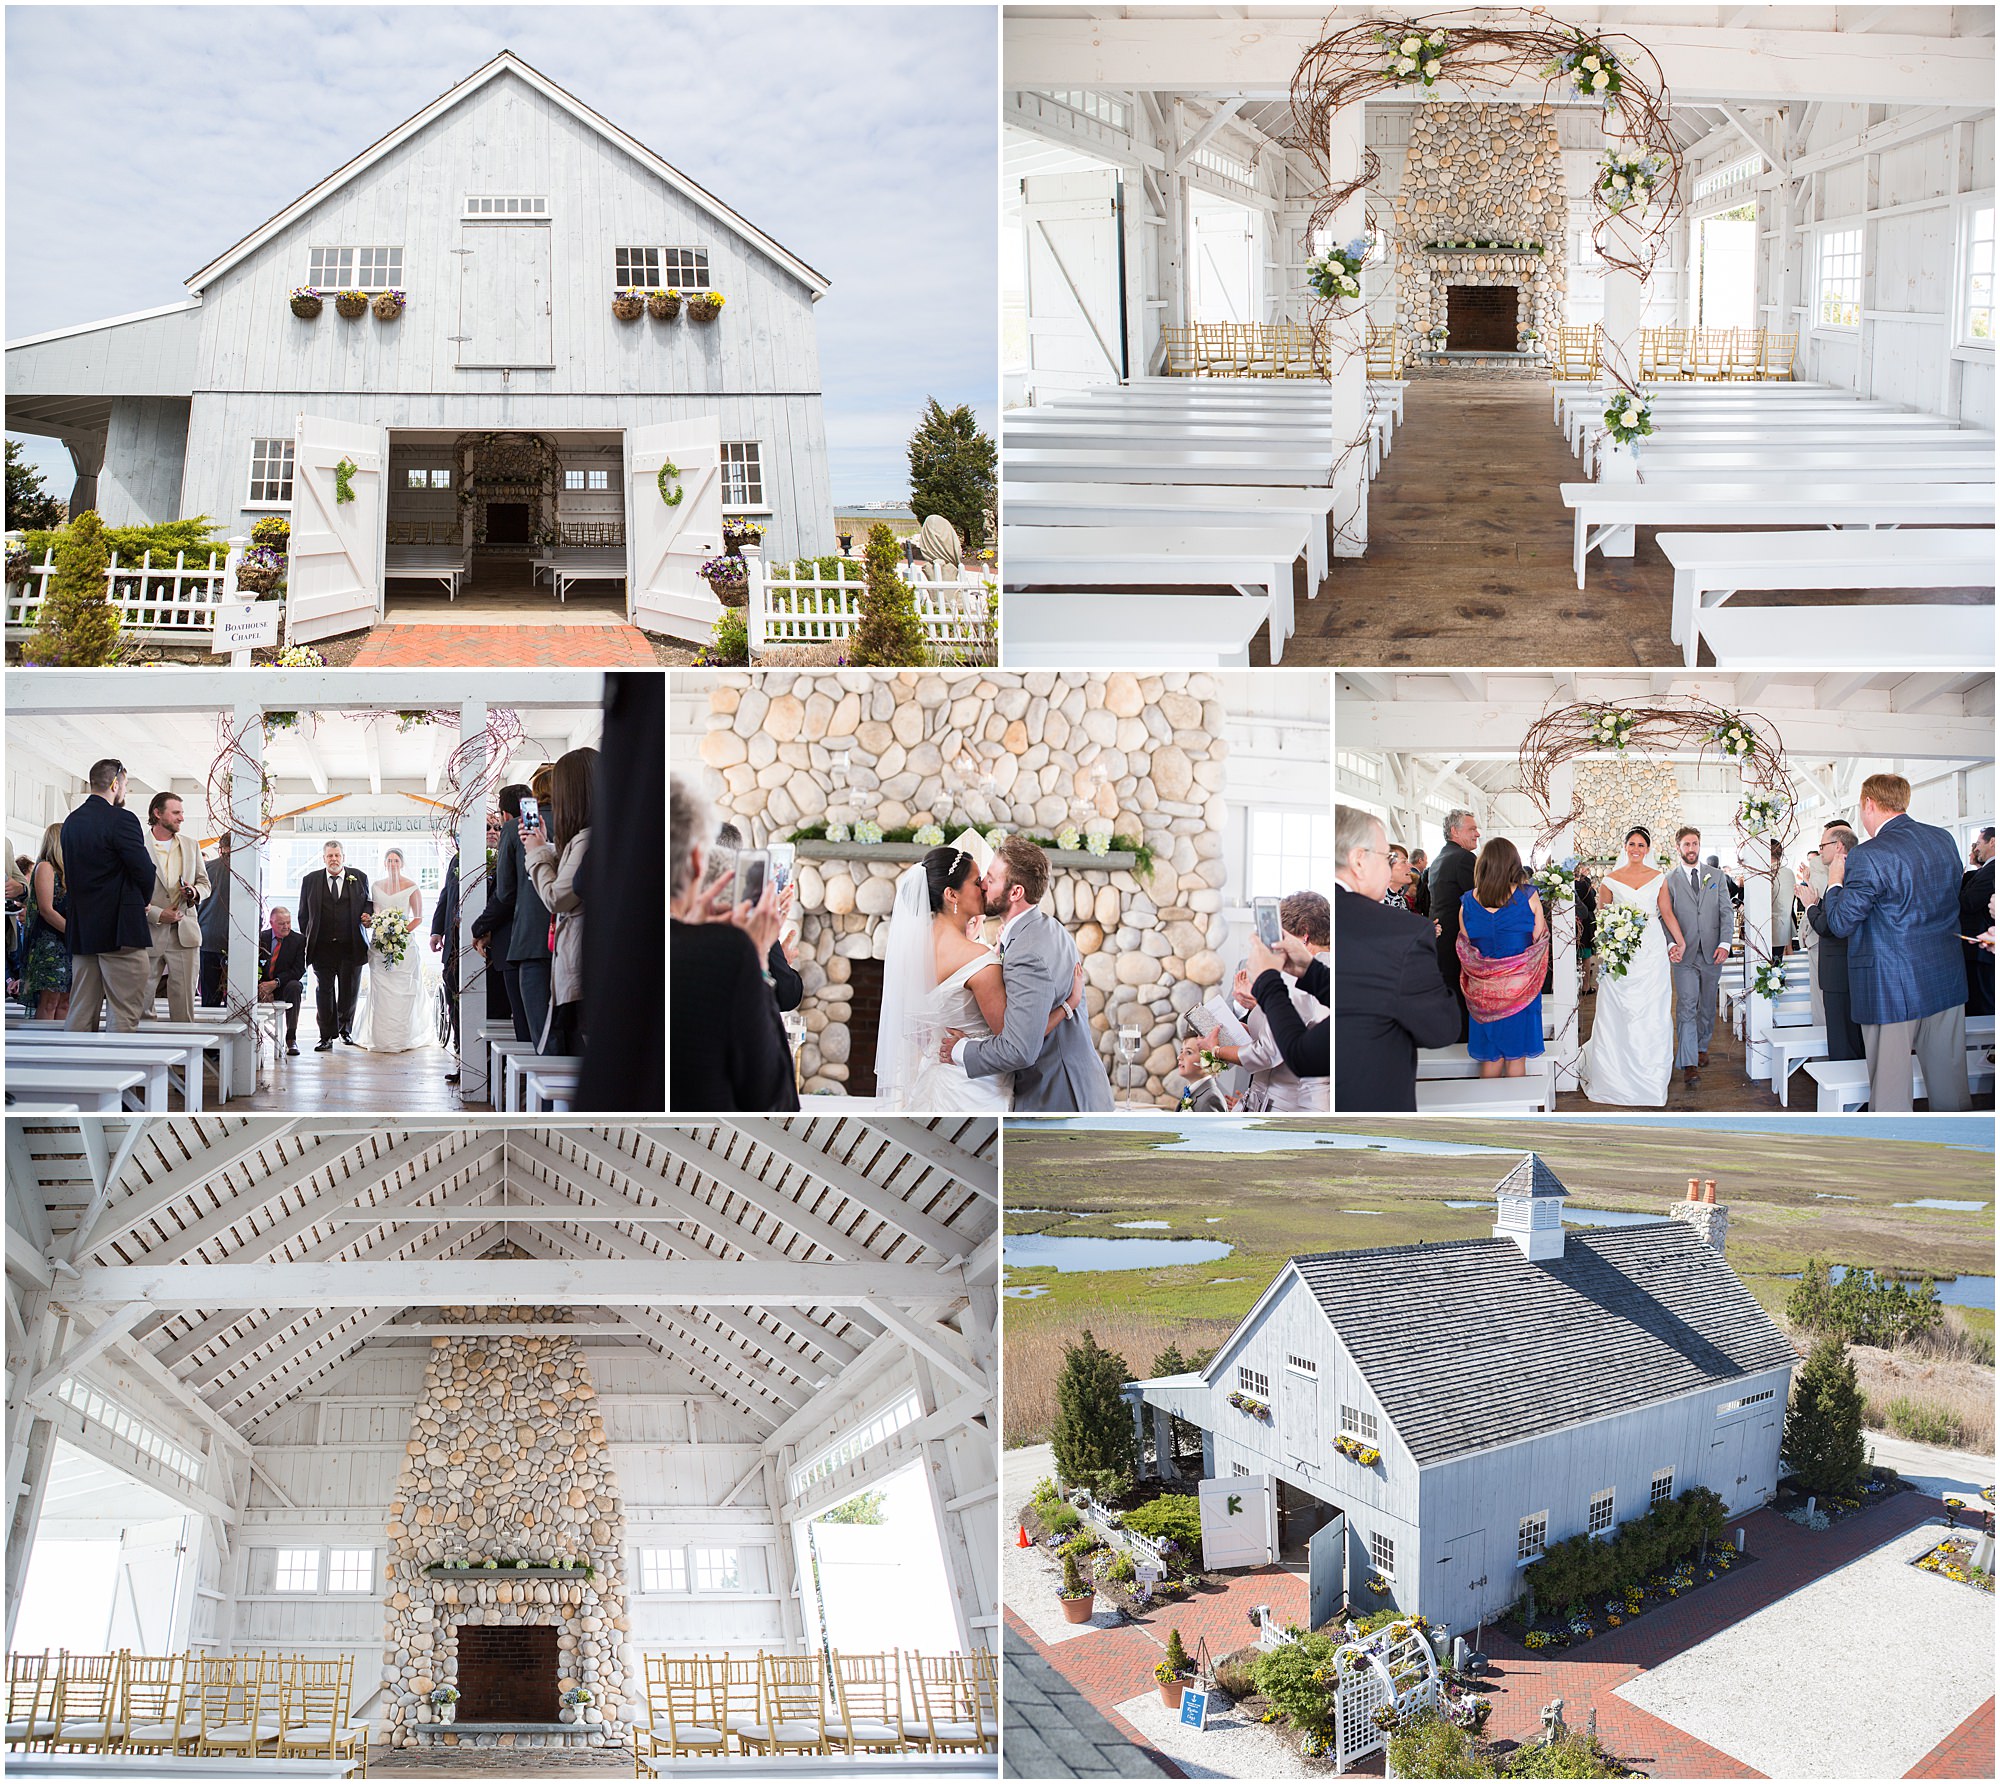 The Best Jersey Shore Wedding Venues by Susan Hennessey Photography, a South Jersey Wedding Photographer